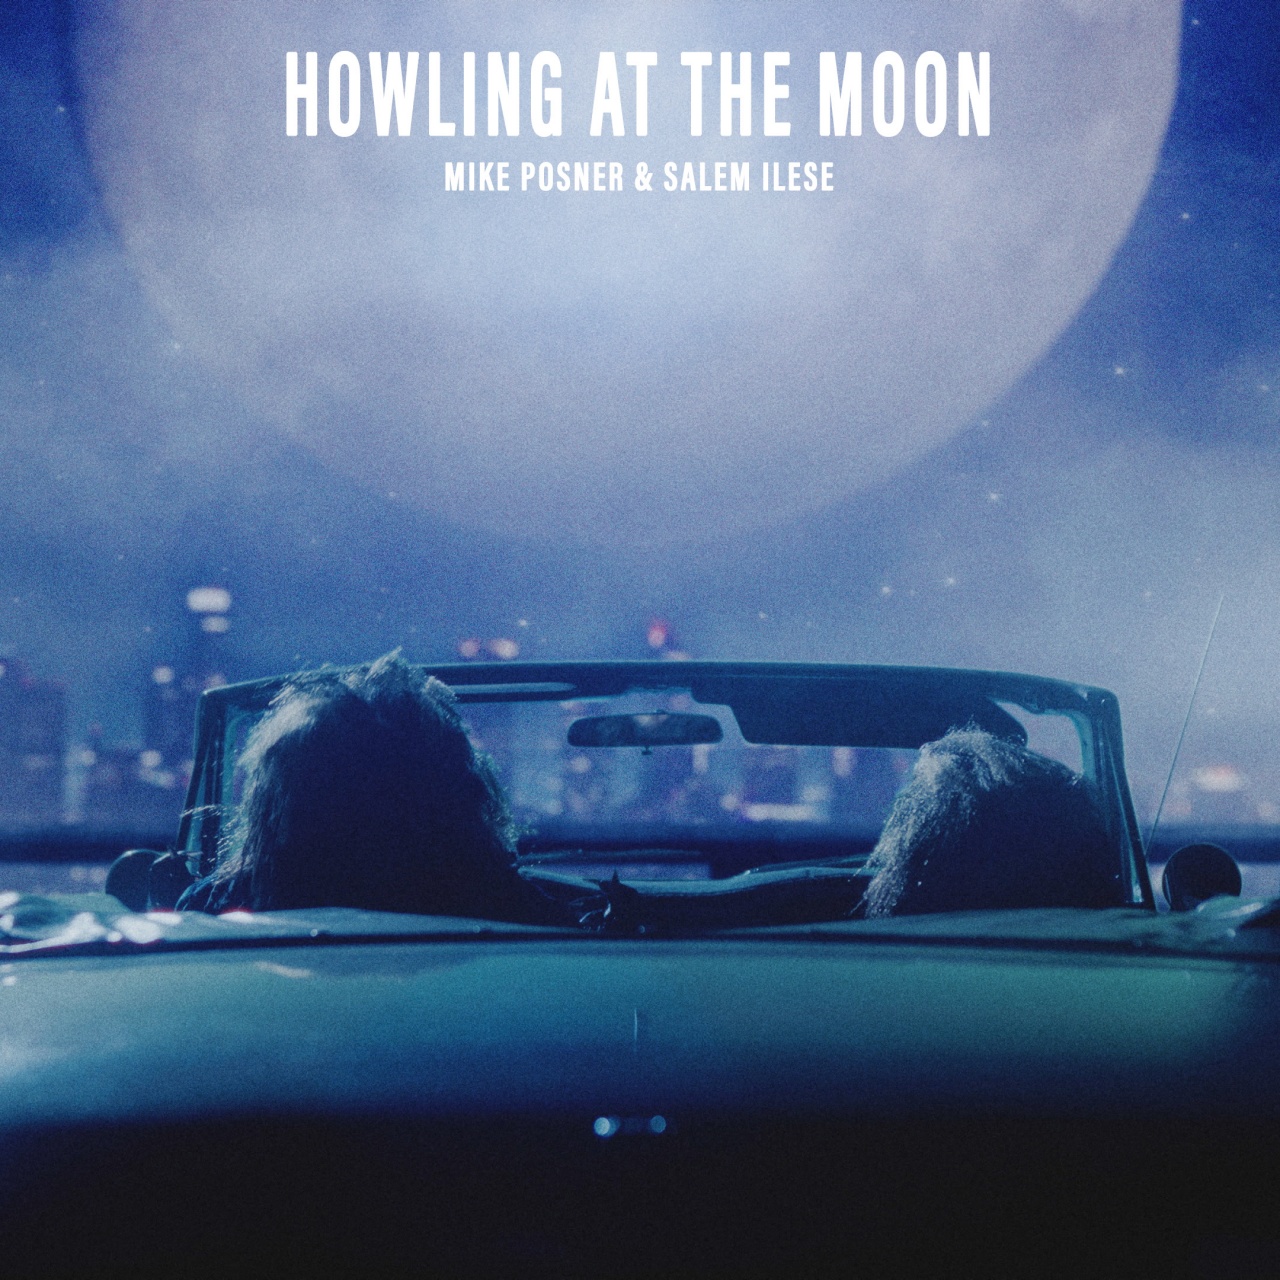 Howling At The Moon - Mike Posner & Salem Ilese